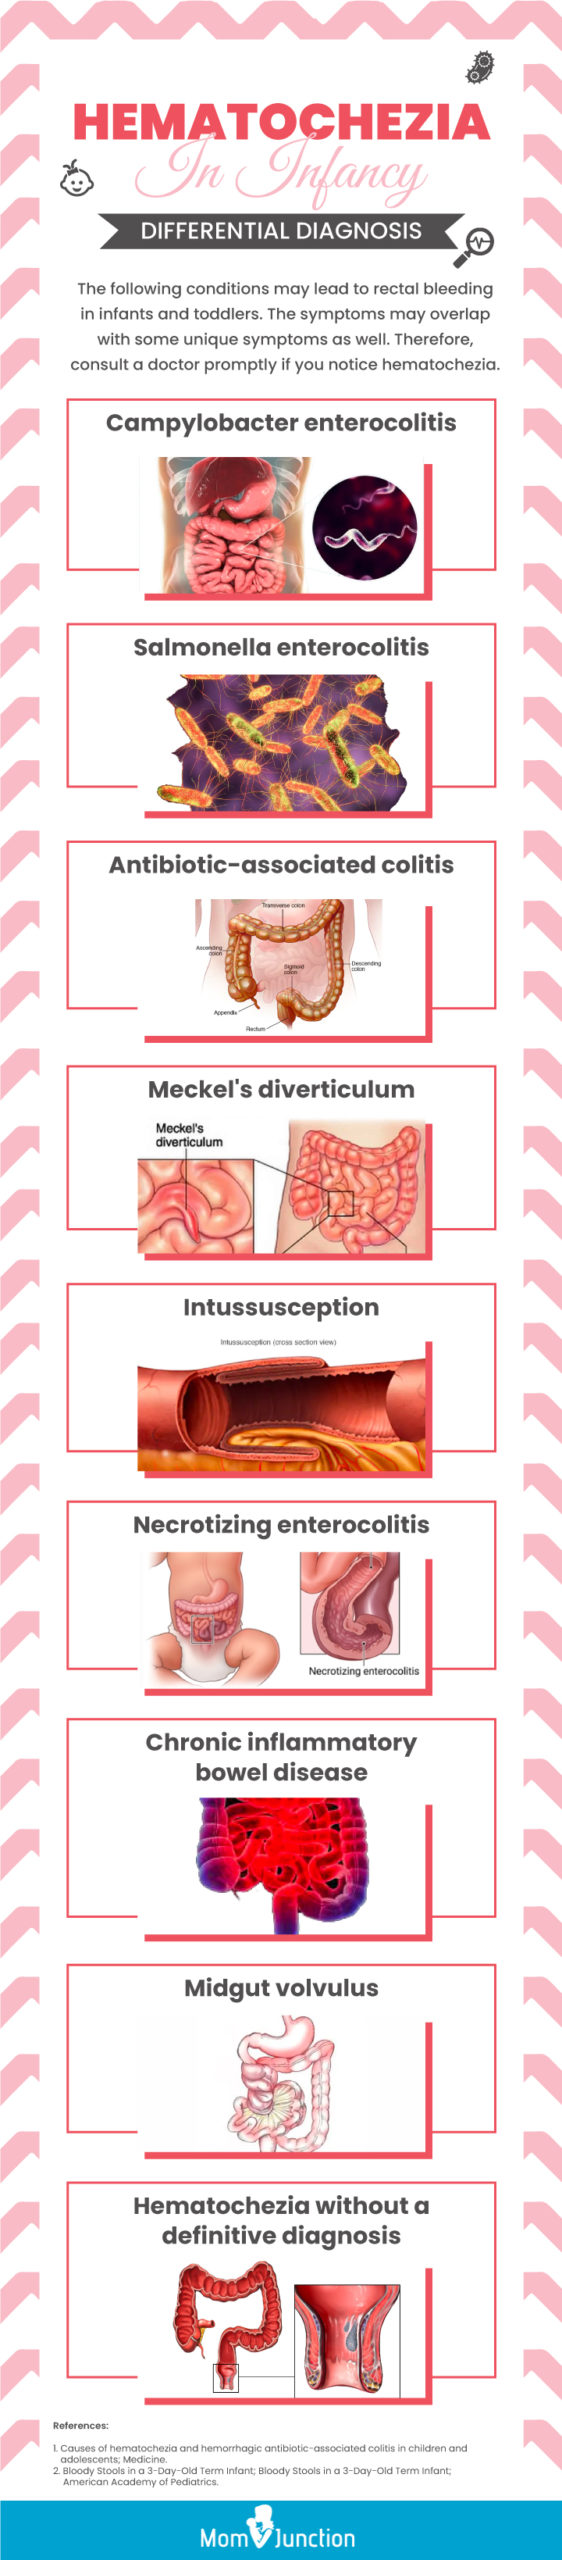 hematochezia in infancy differential diagnosis (infographic)